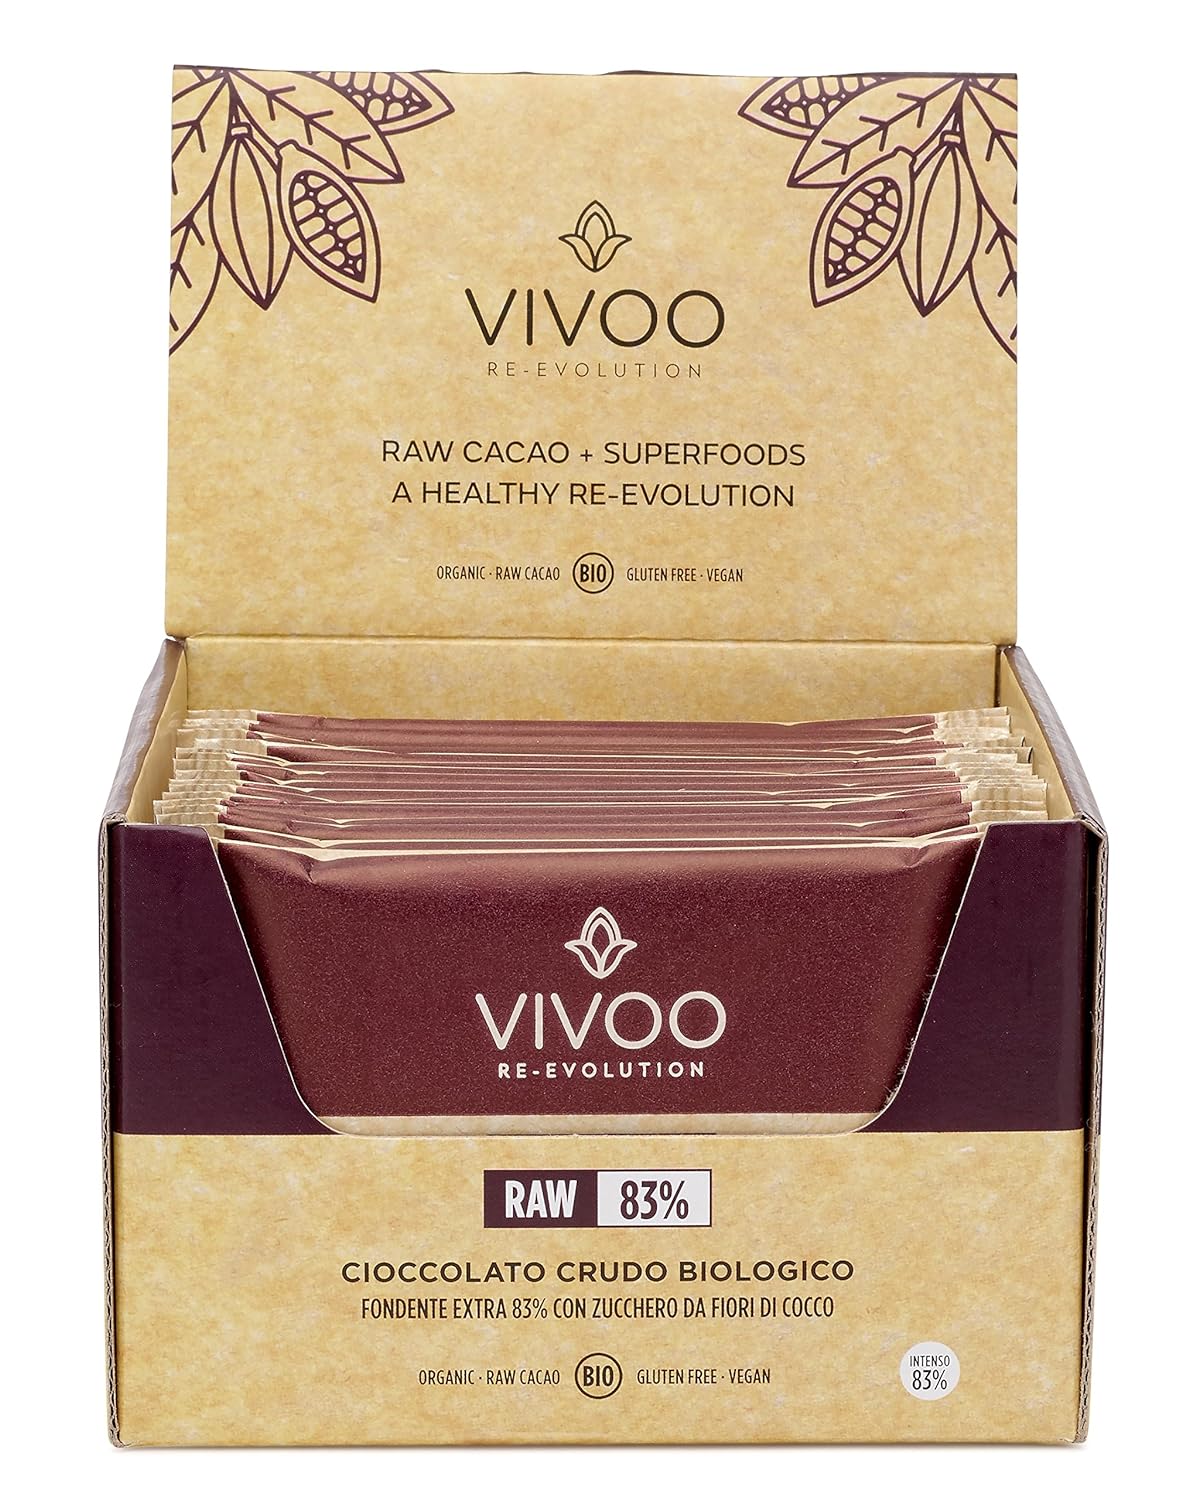  VIVOO 70% Raw Chocolate Bar With Spirulina, Cashews And Coconut Sugar. Pack of 20 X 30g